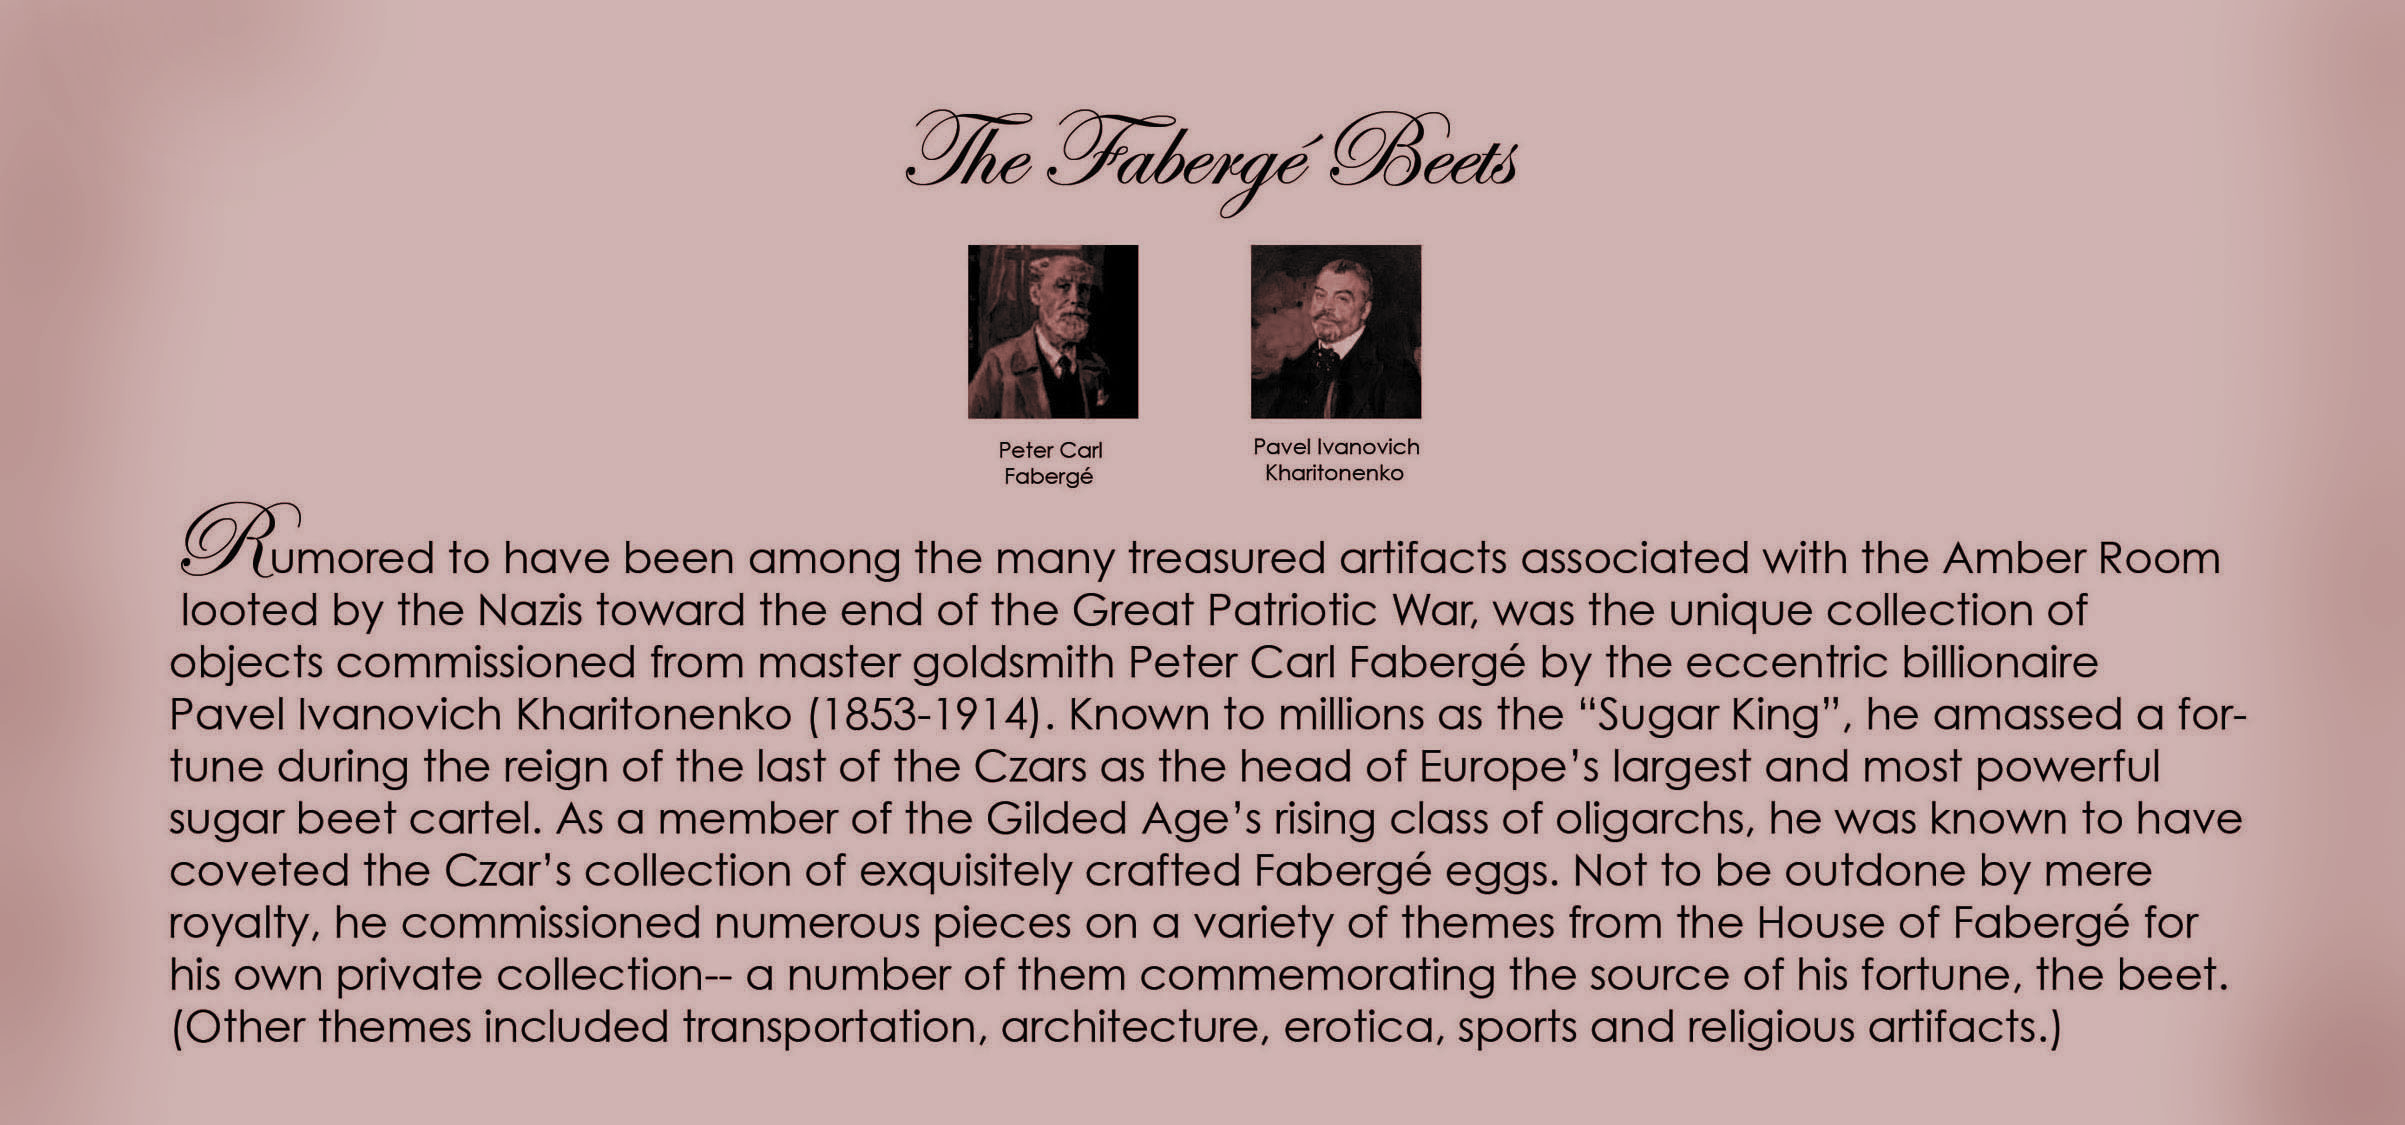 the Faberge Beets